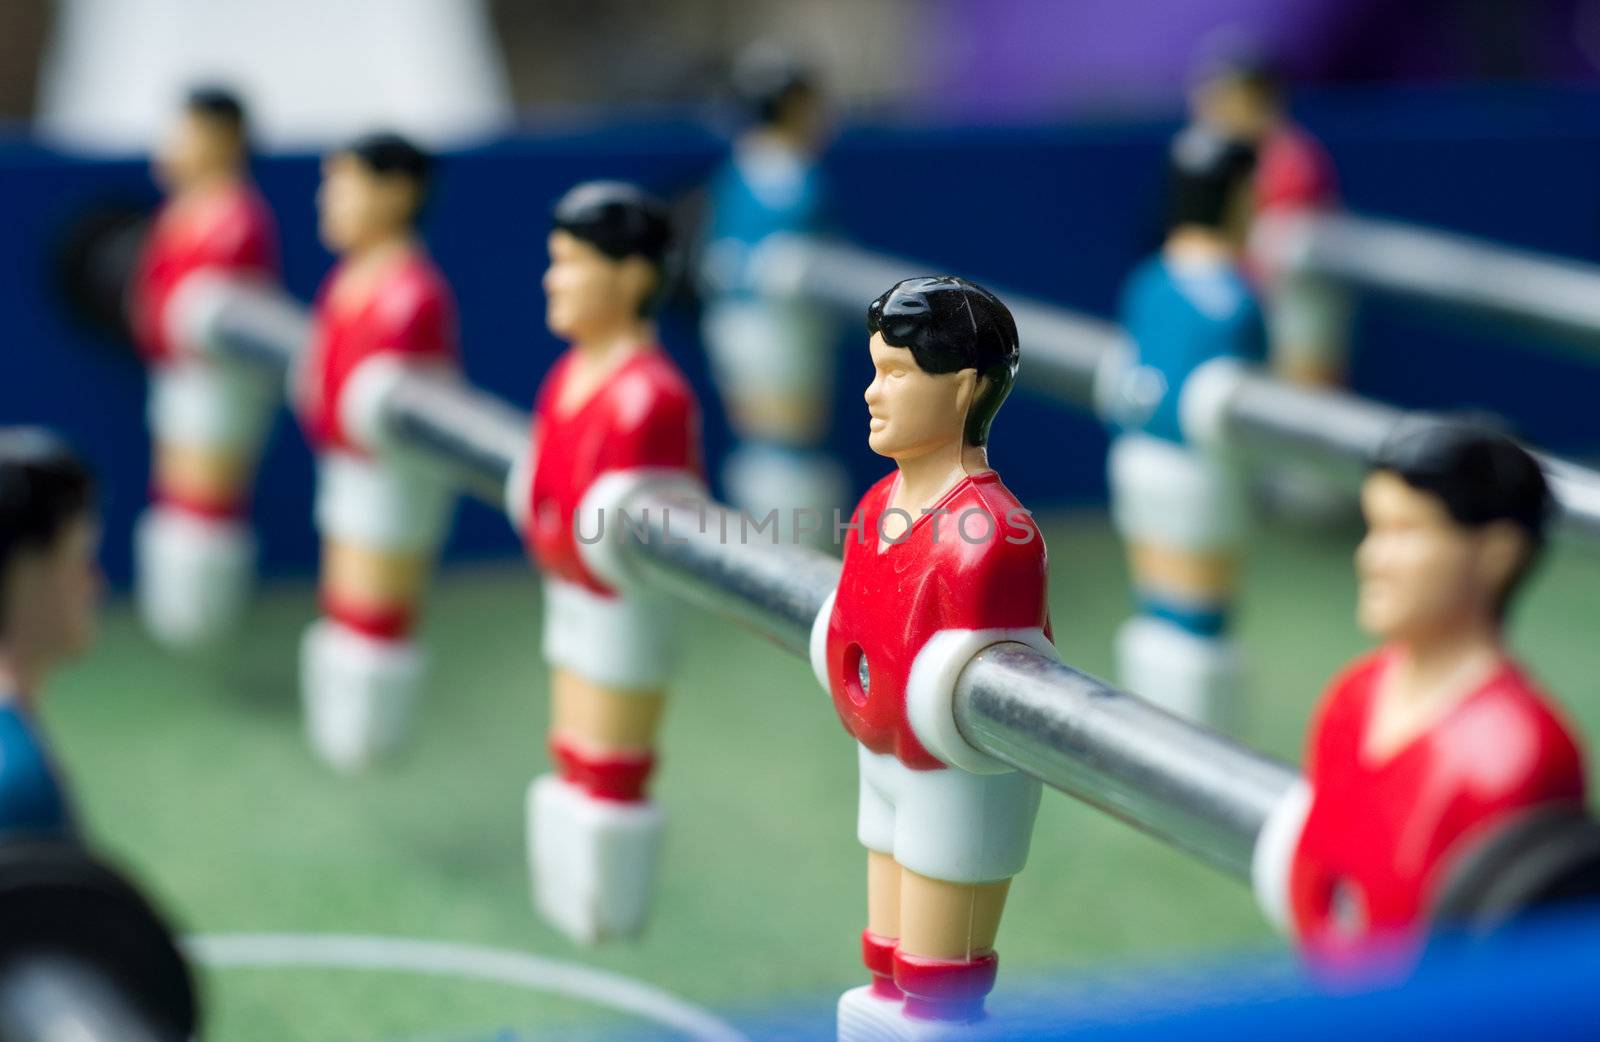 Red table soccer players by alistaircotton